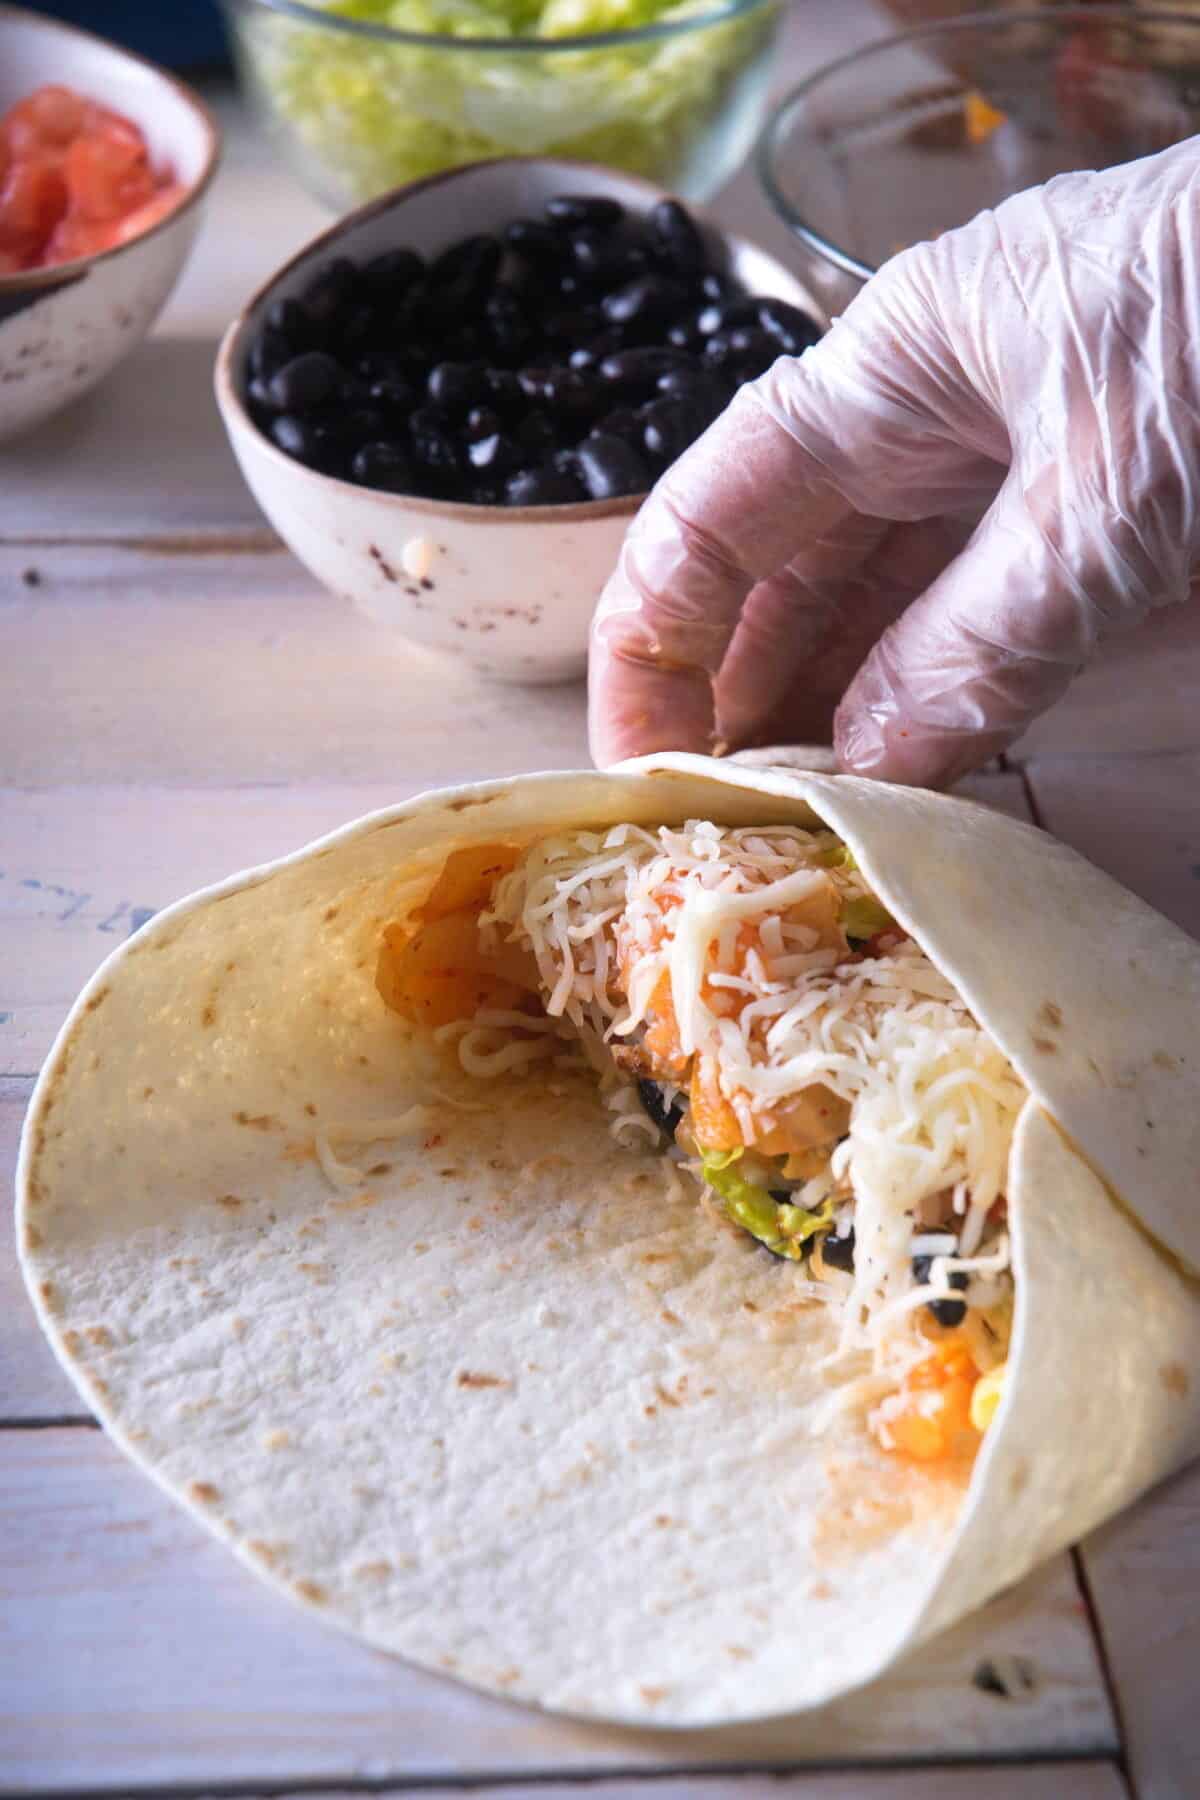 Tortilla with burrito ingredients being wrapped up.